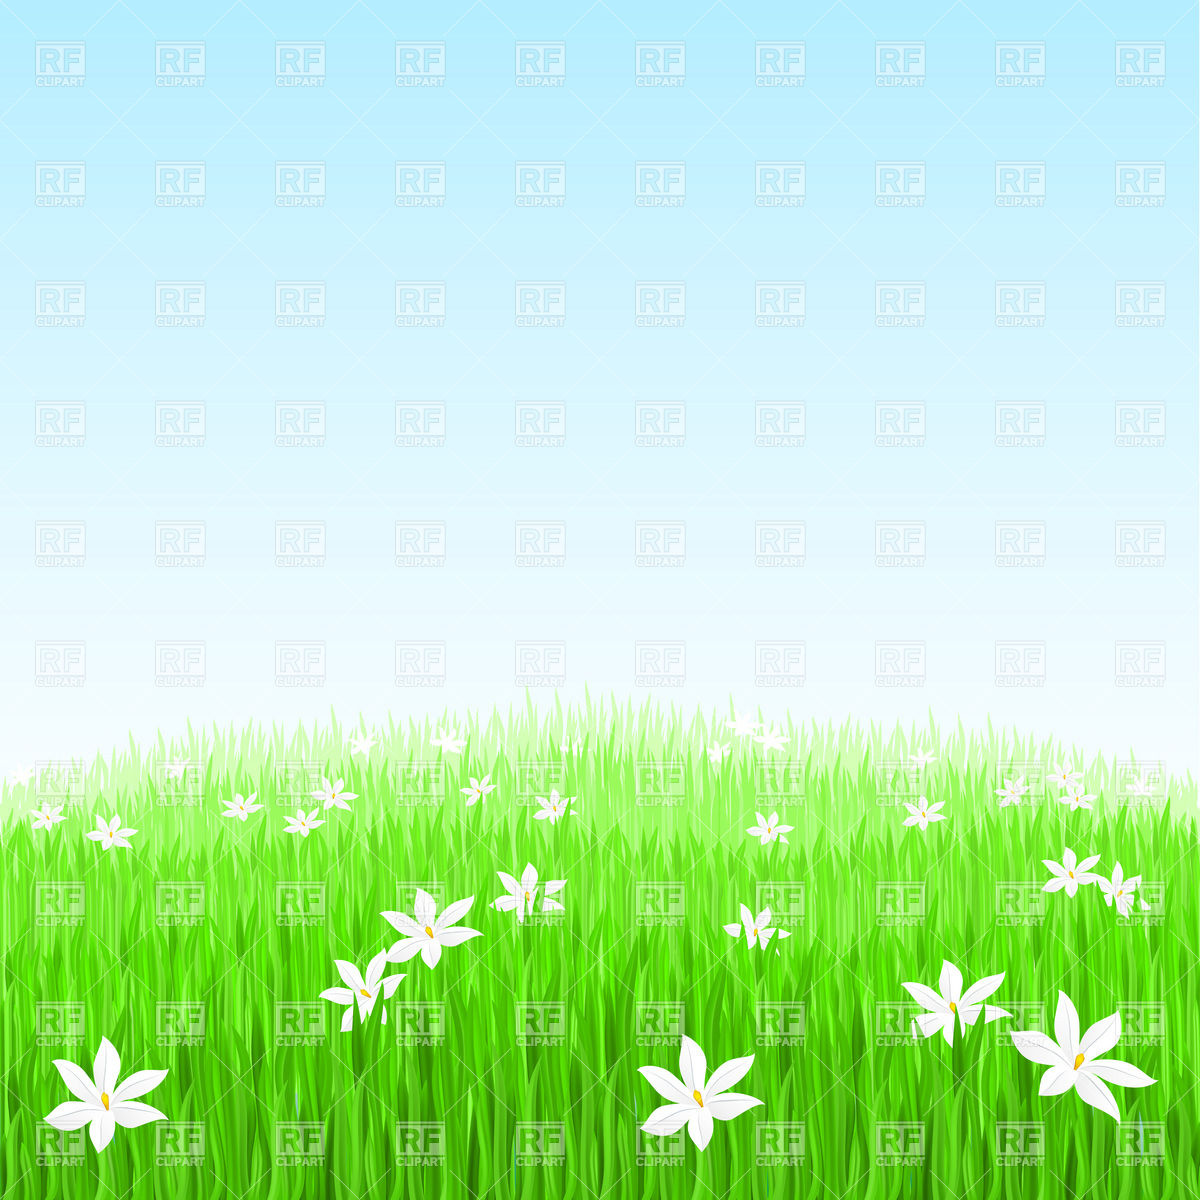 Green Grass With White Flowers 8389 Backgrounds Textures Abstract